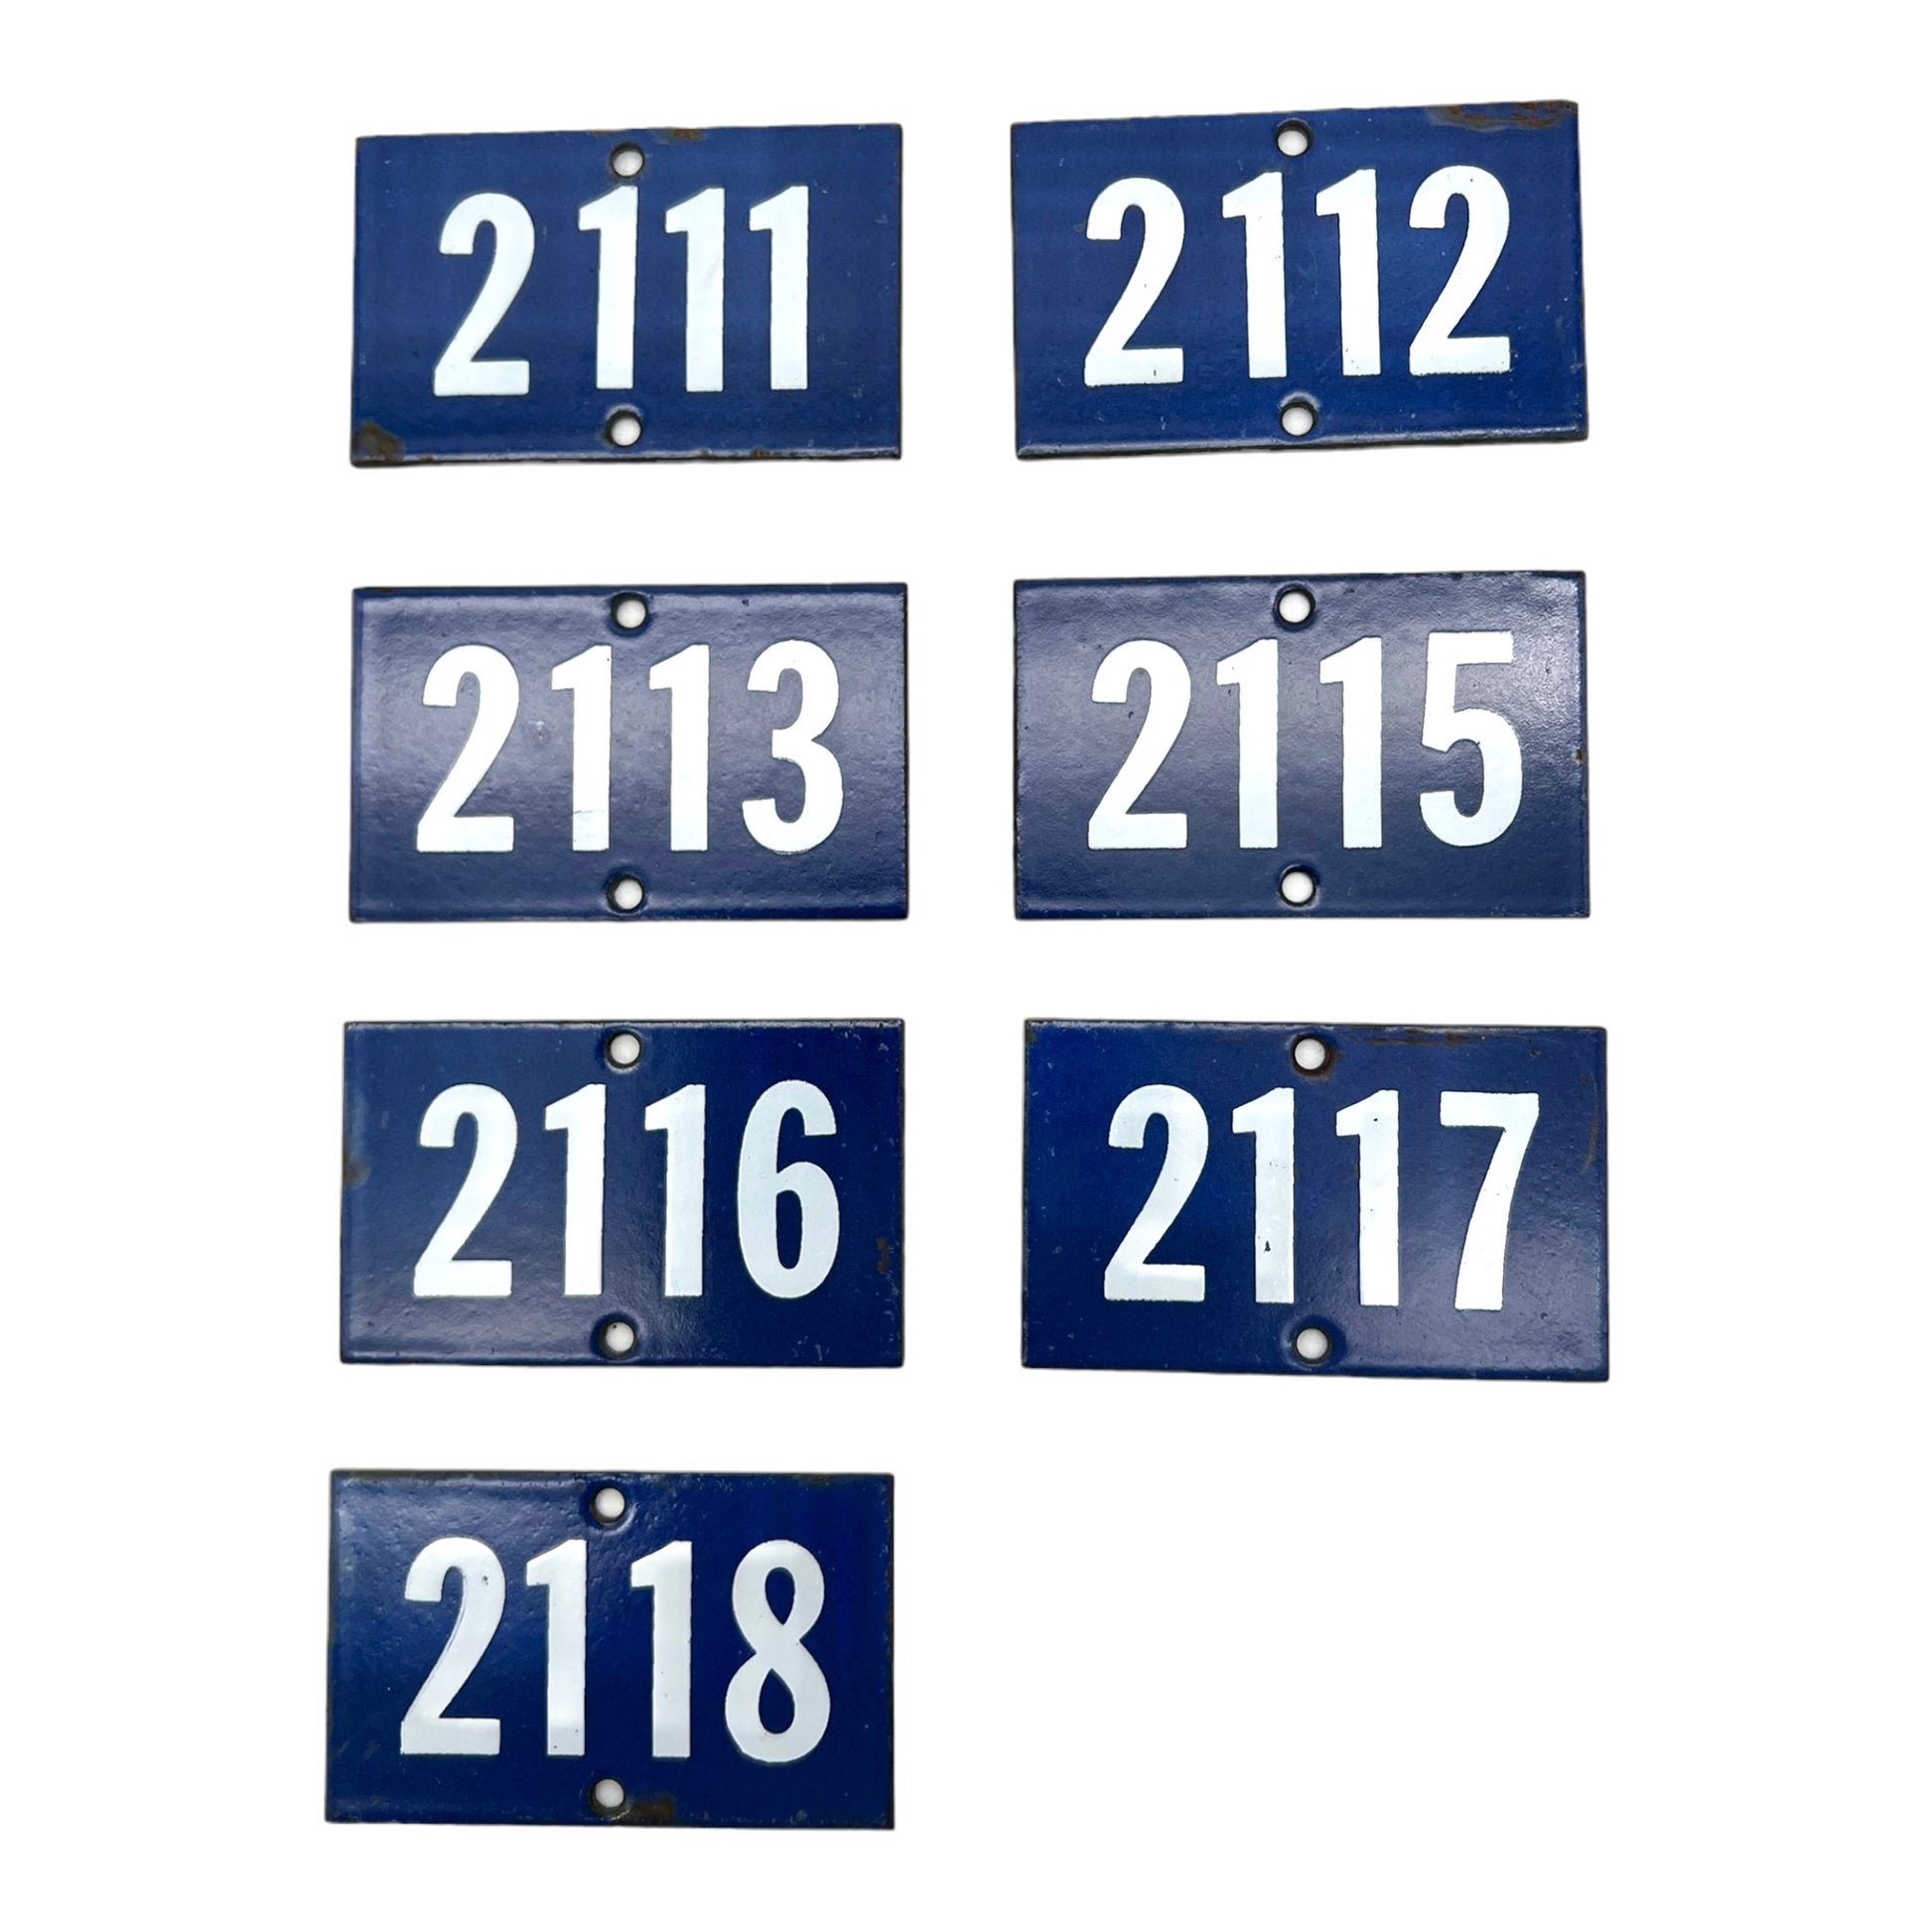 Image of blue enamel house or door numbers sold by All Things French Store